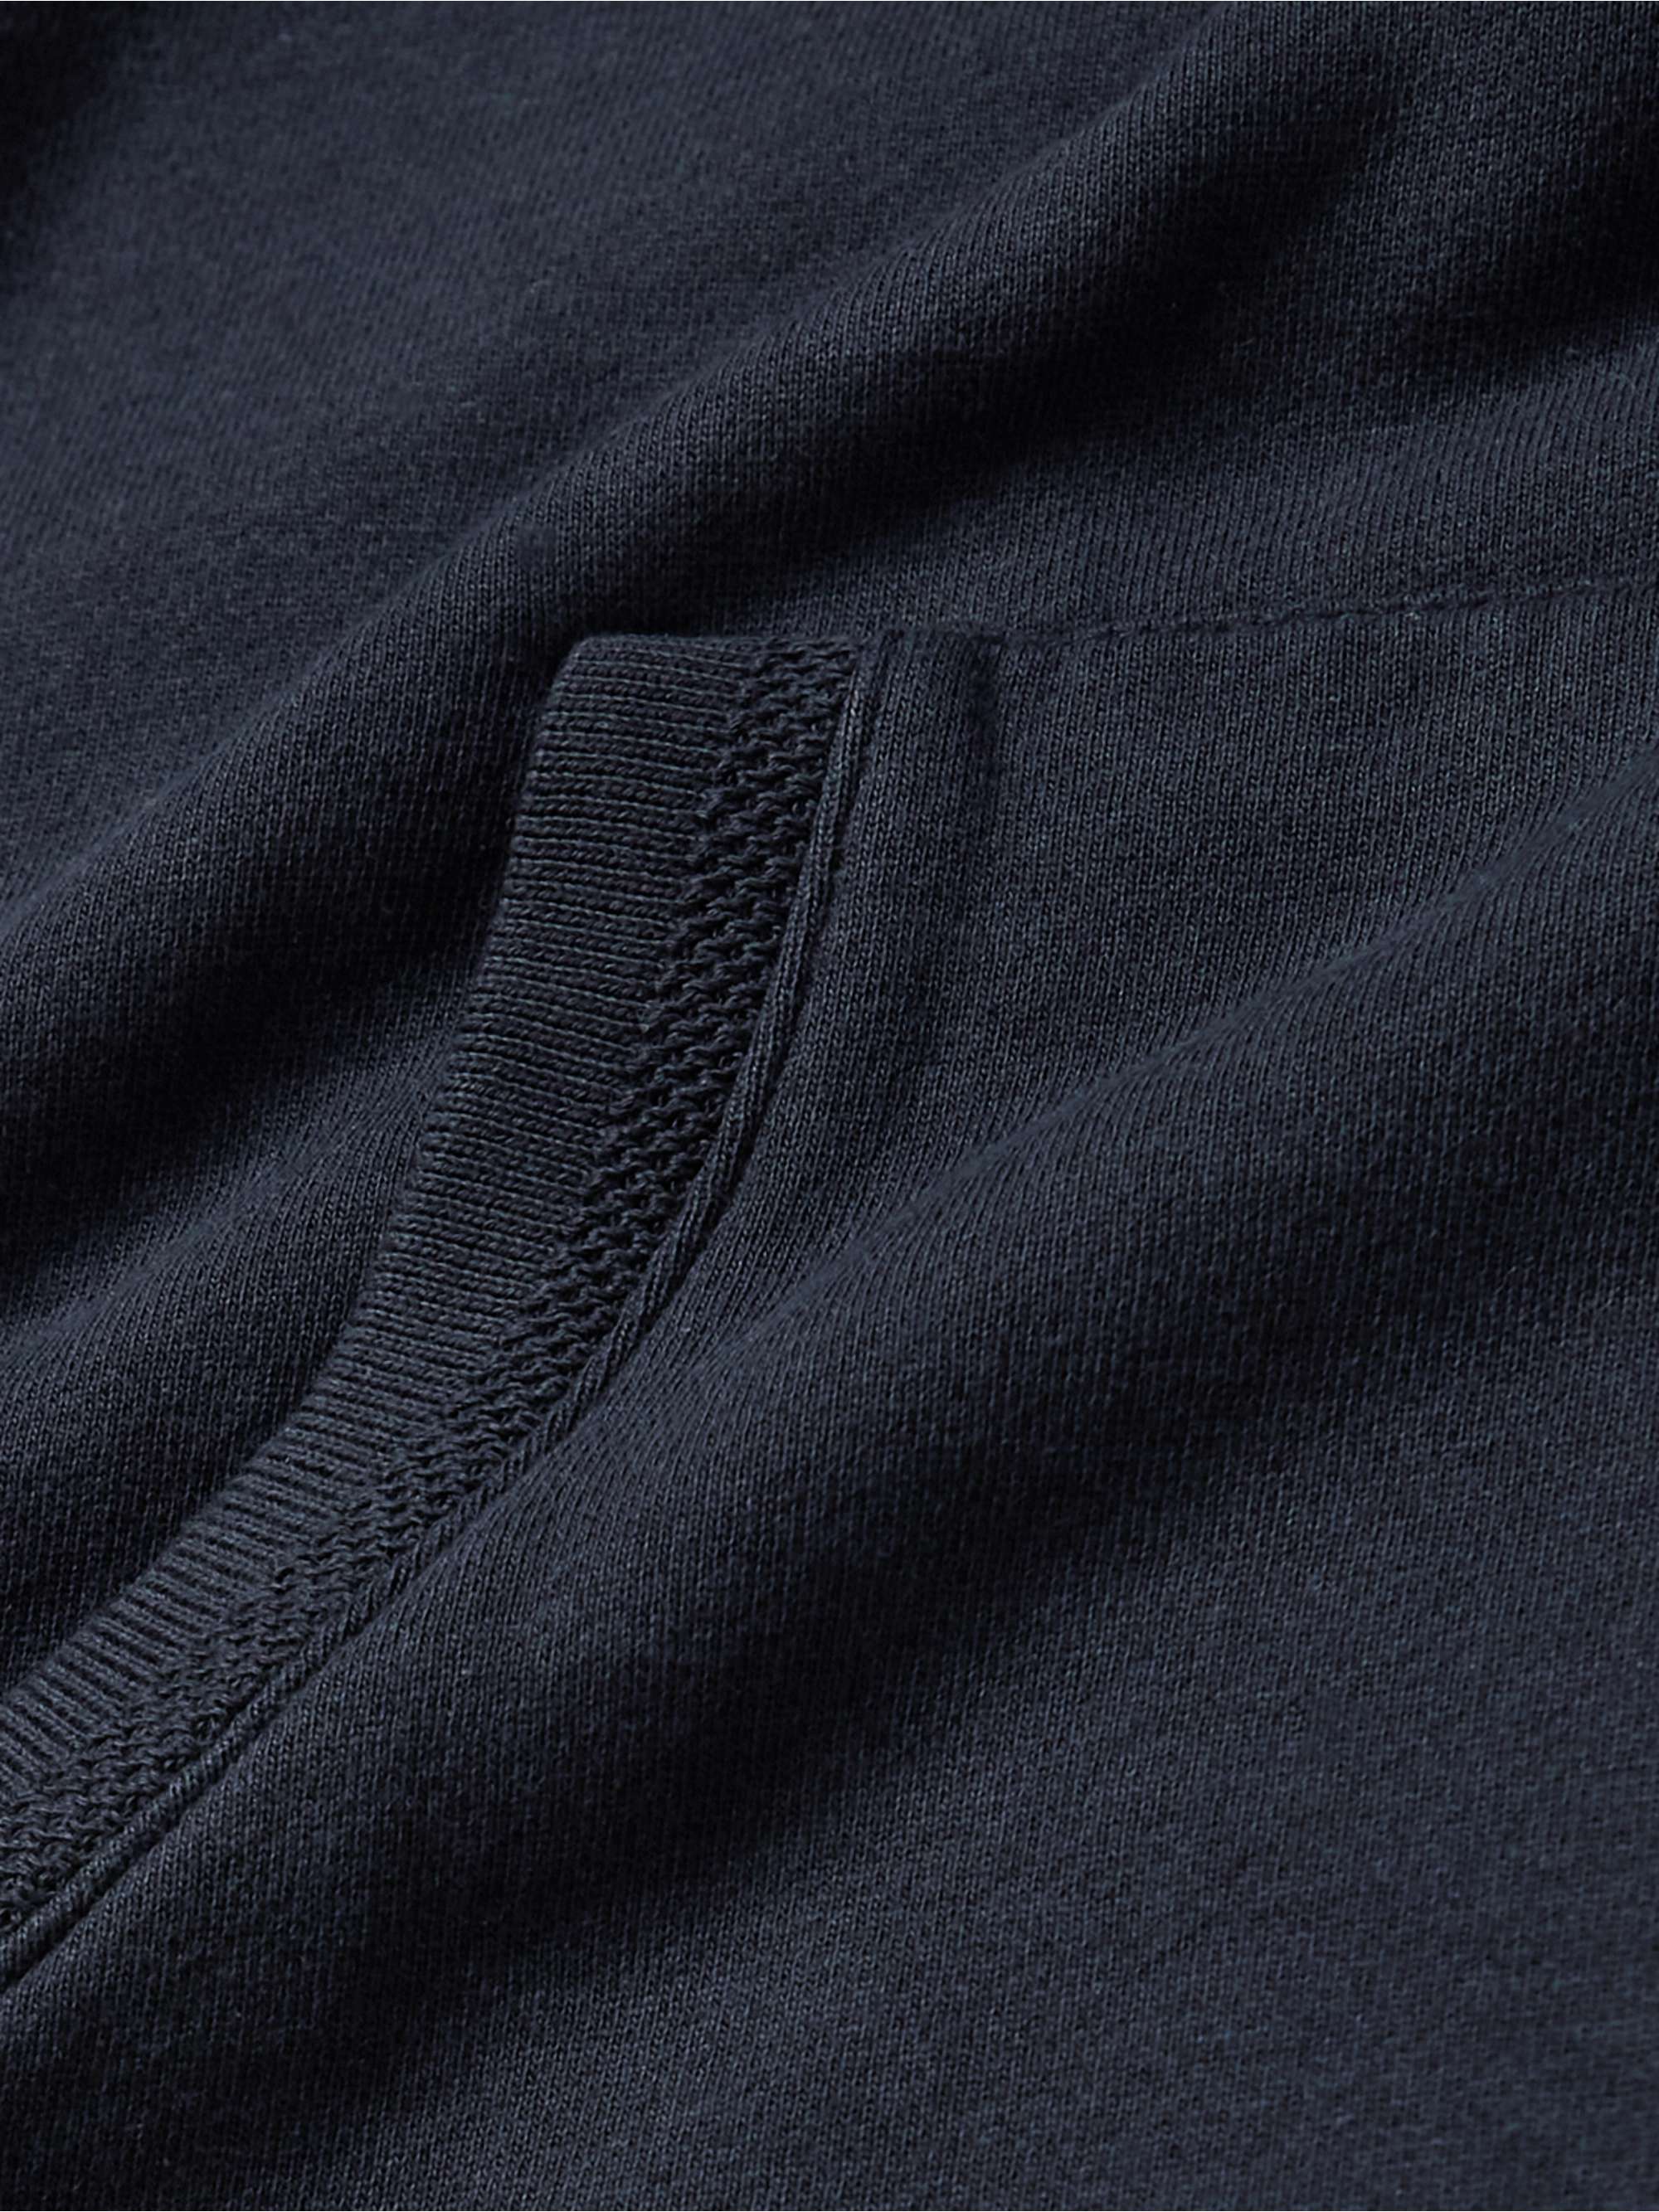 HAMILTON AND HARE Cotton and Lyocell-Blend Jersey Half-Zip Sweatshirt